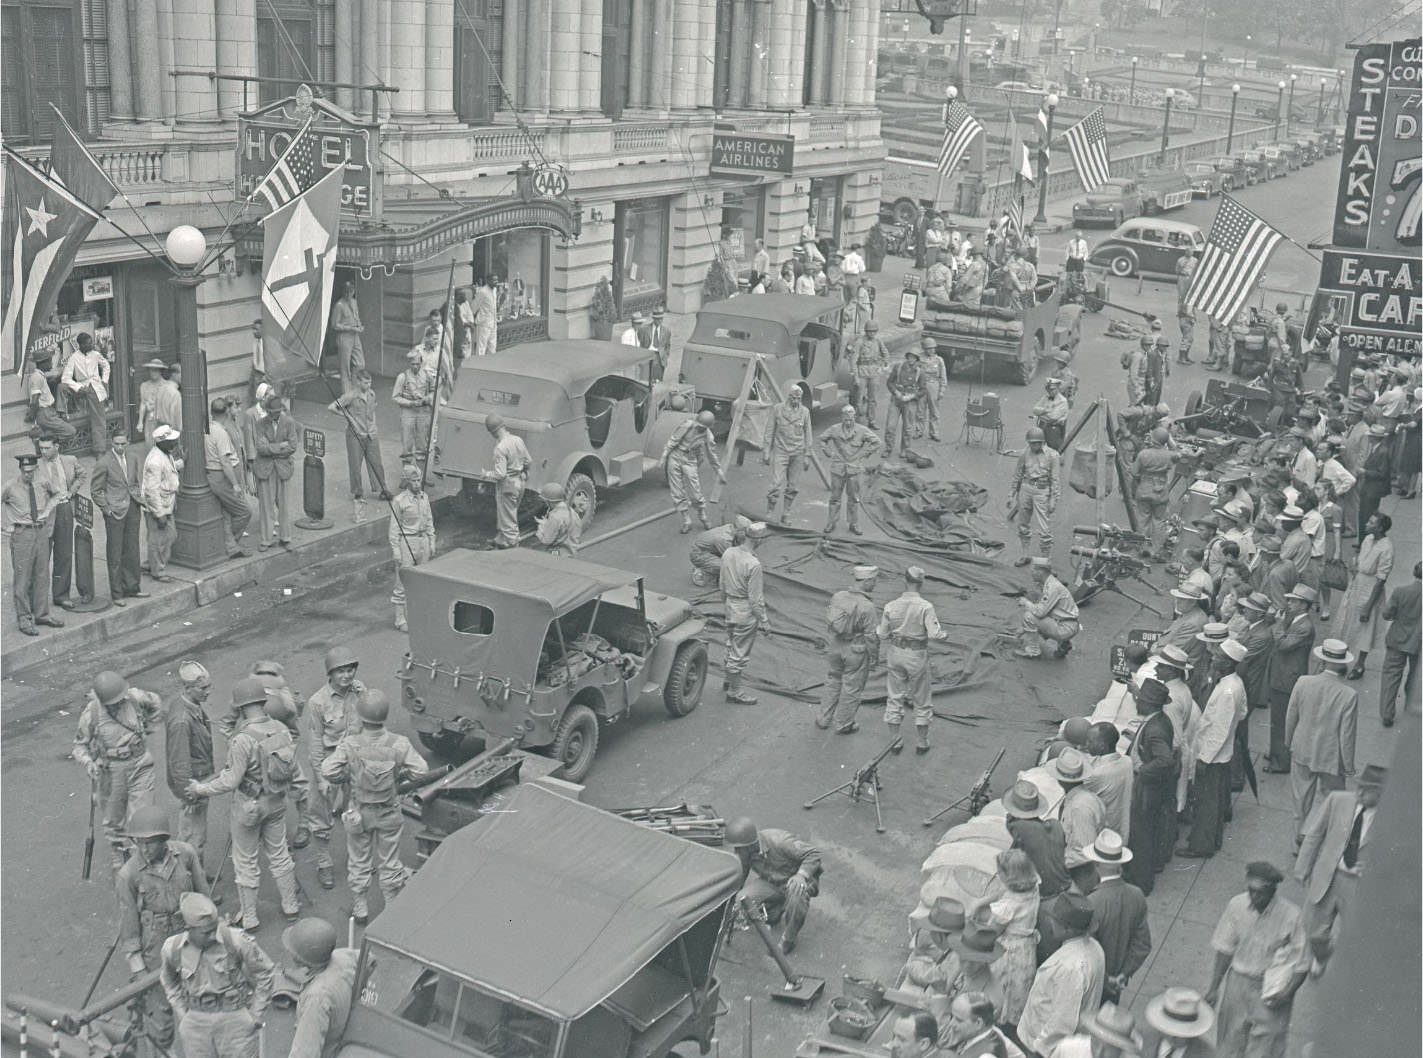 A scene from the Bond Sales Drive by the Army, Navy, and Civic Clubs, on 6th Avenue N in downtown Nashville.